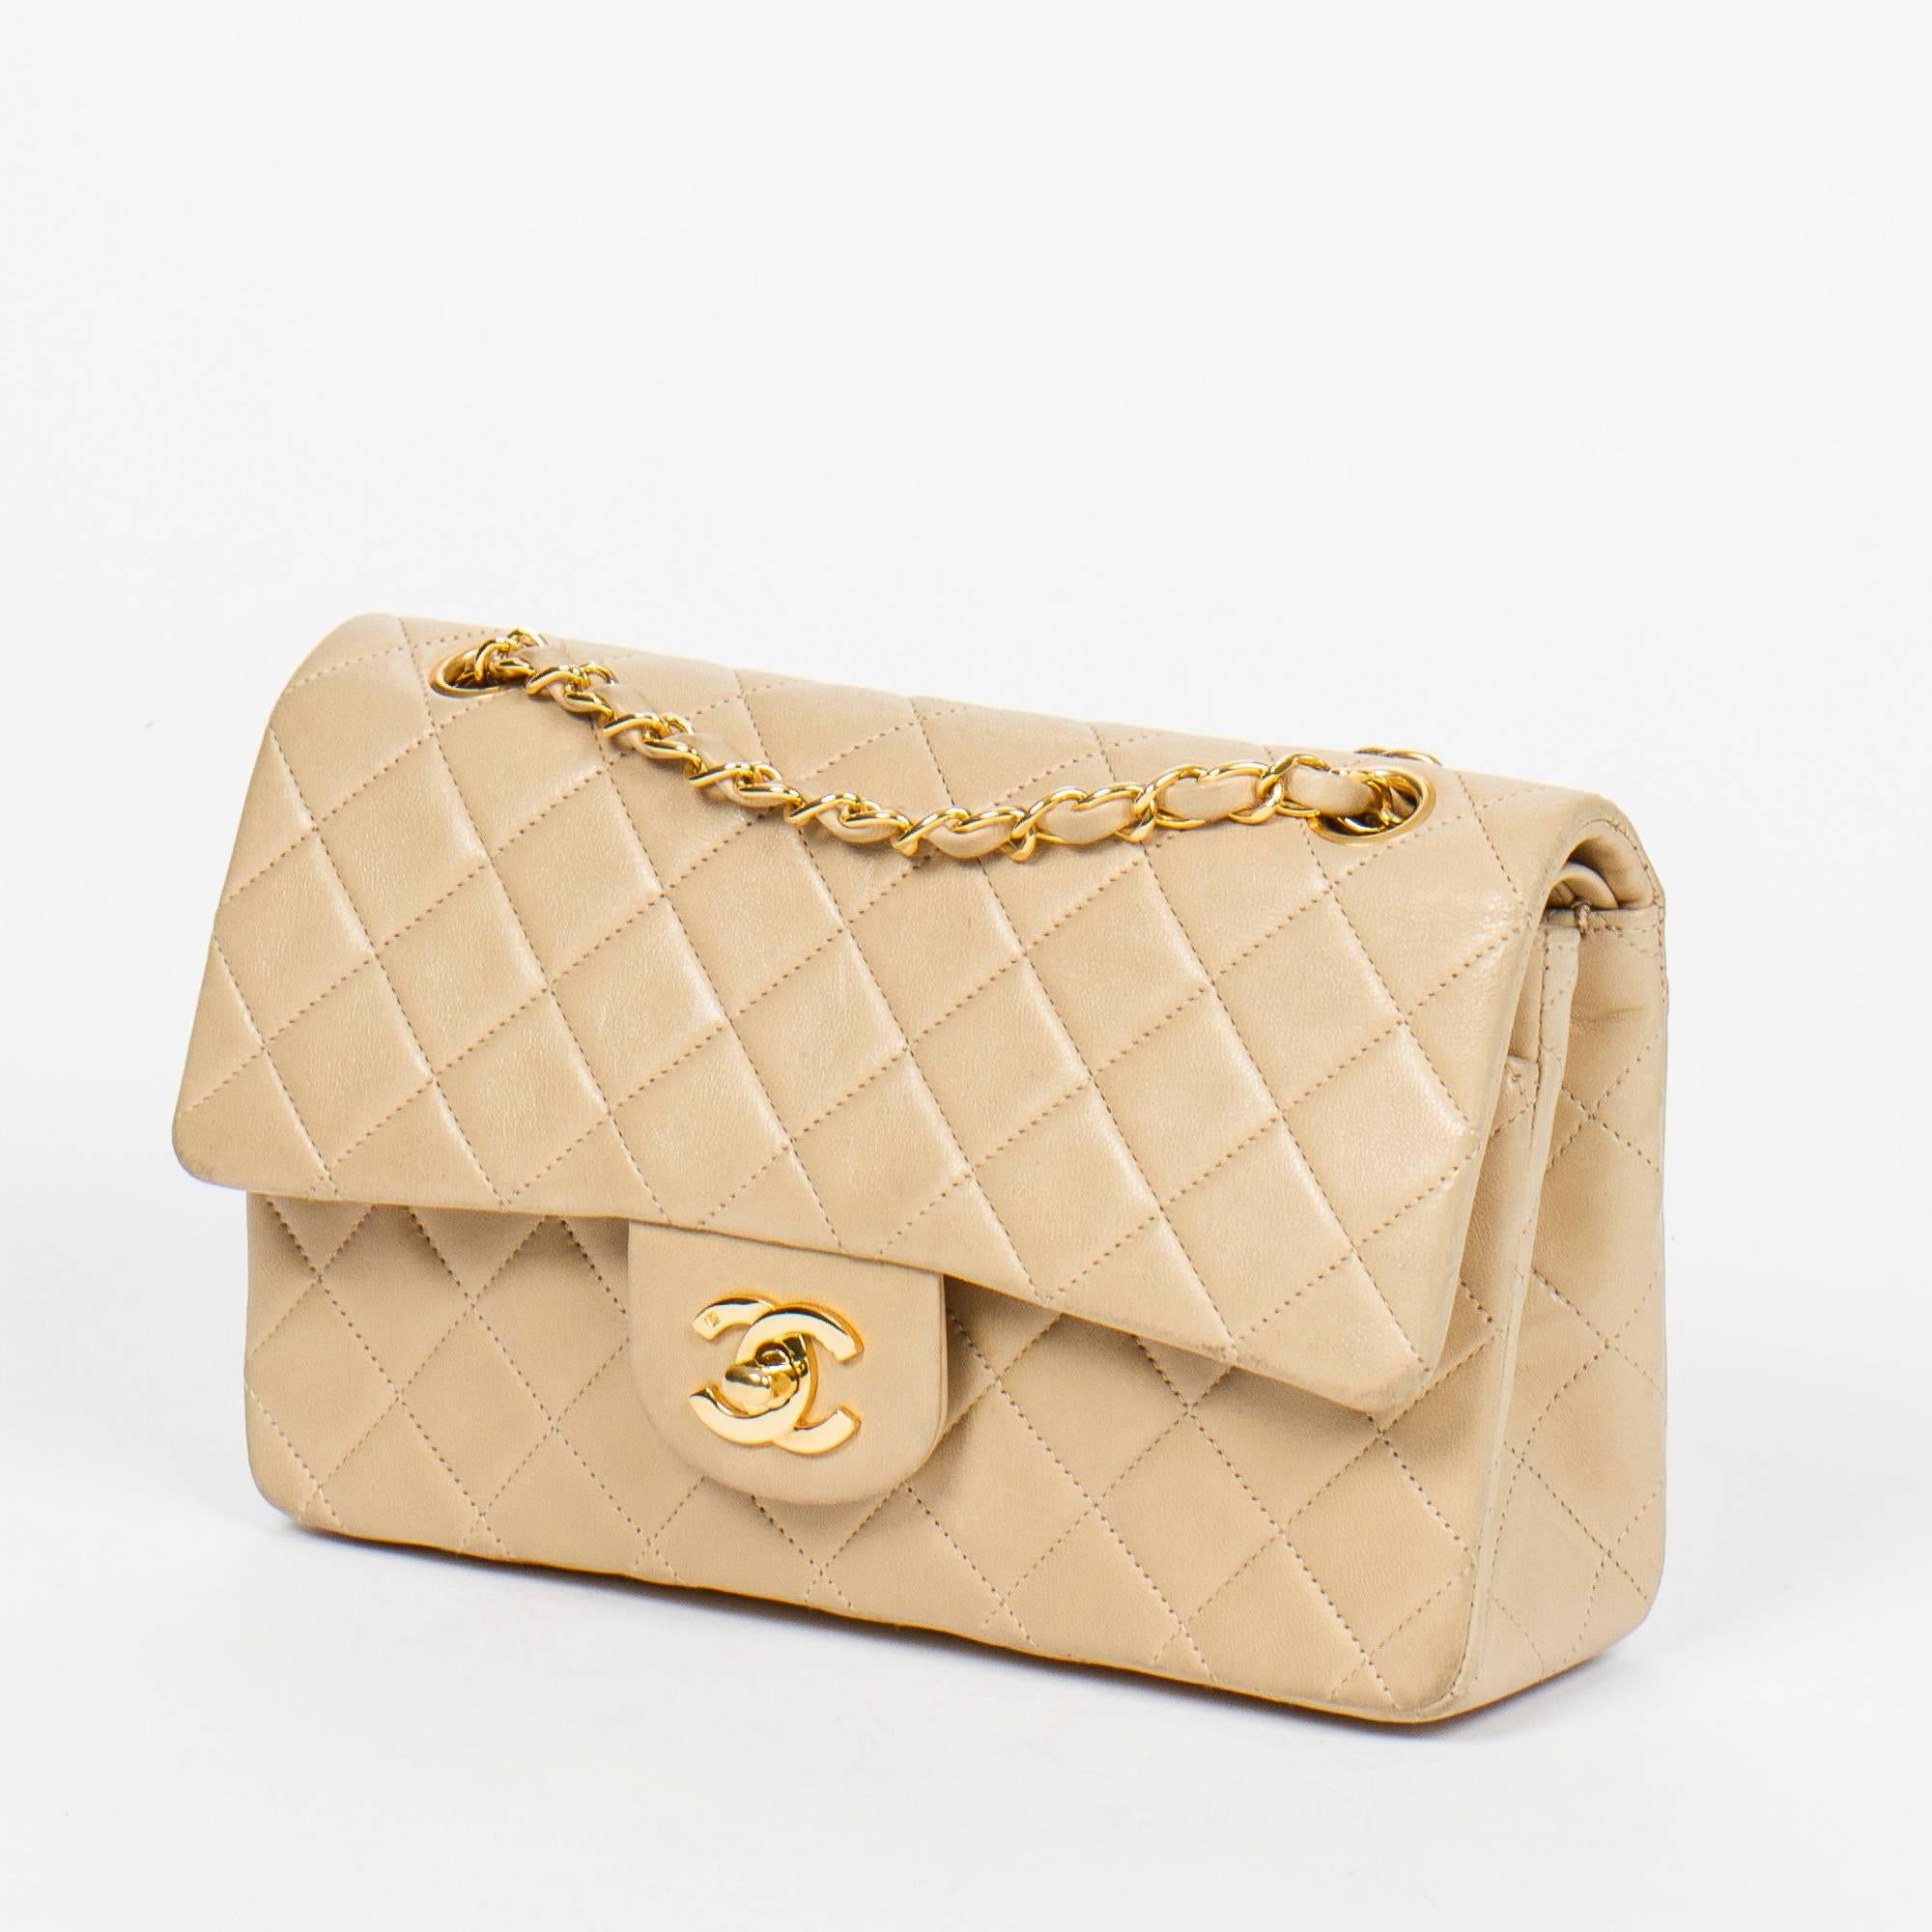 Shoulder bag Chanel Classic Double Flap in beige leather. This product has already been used. It presents various signs of wear but is in good condition, with an optimal vintage patina. Presents some mark, trace or wear inside and outside.